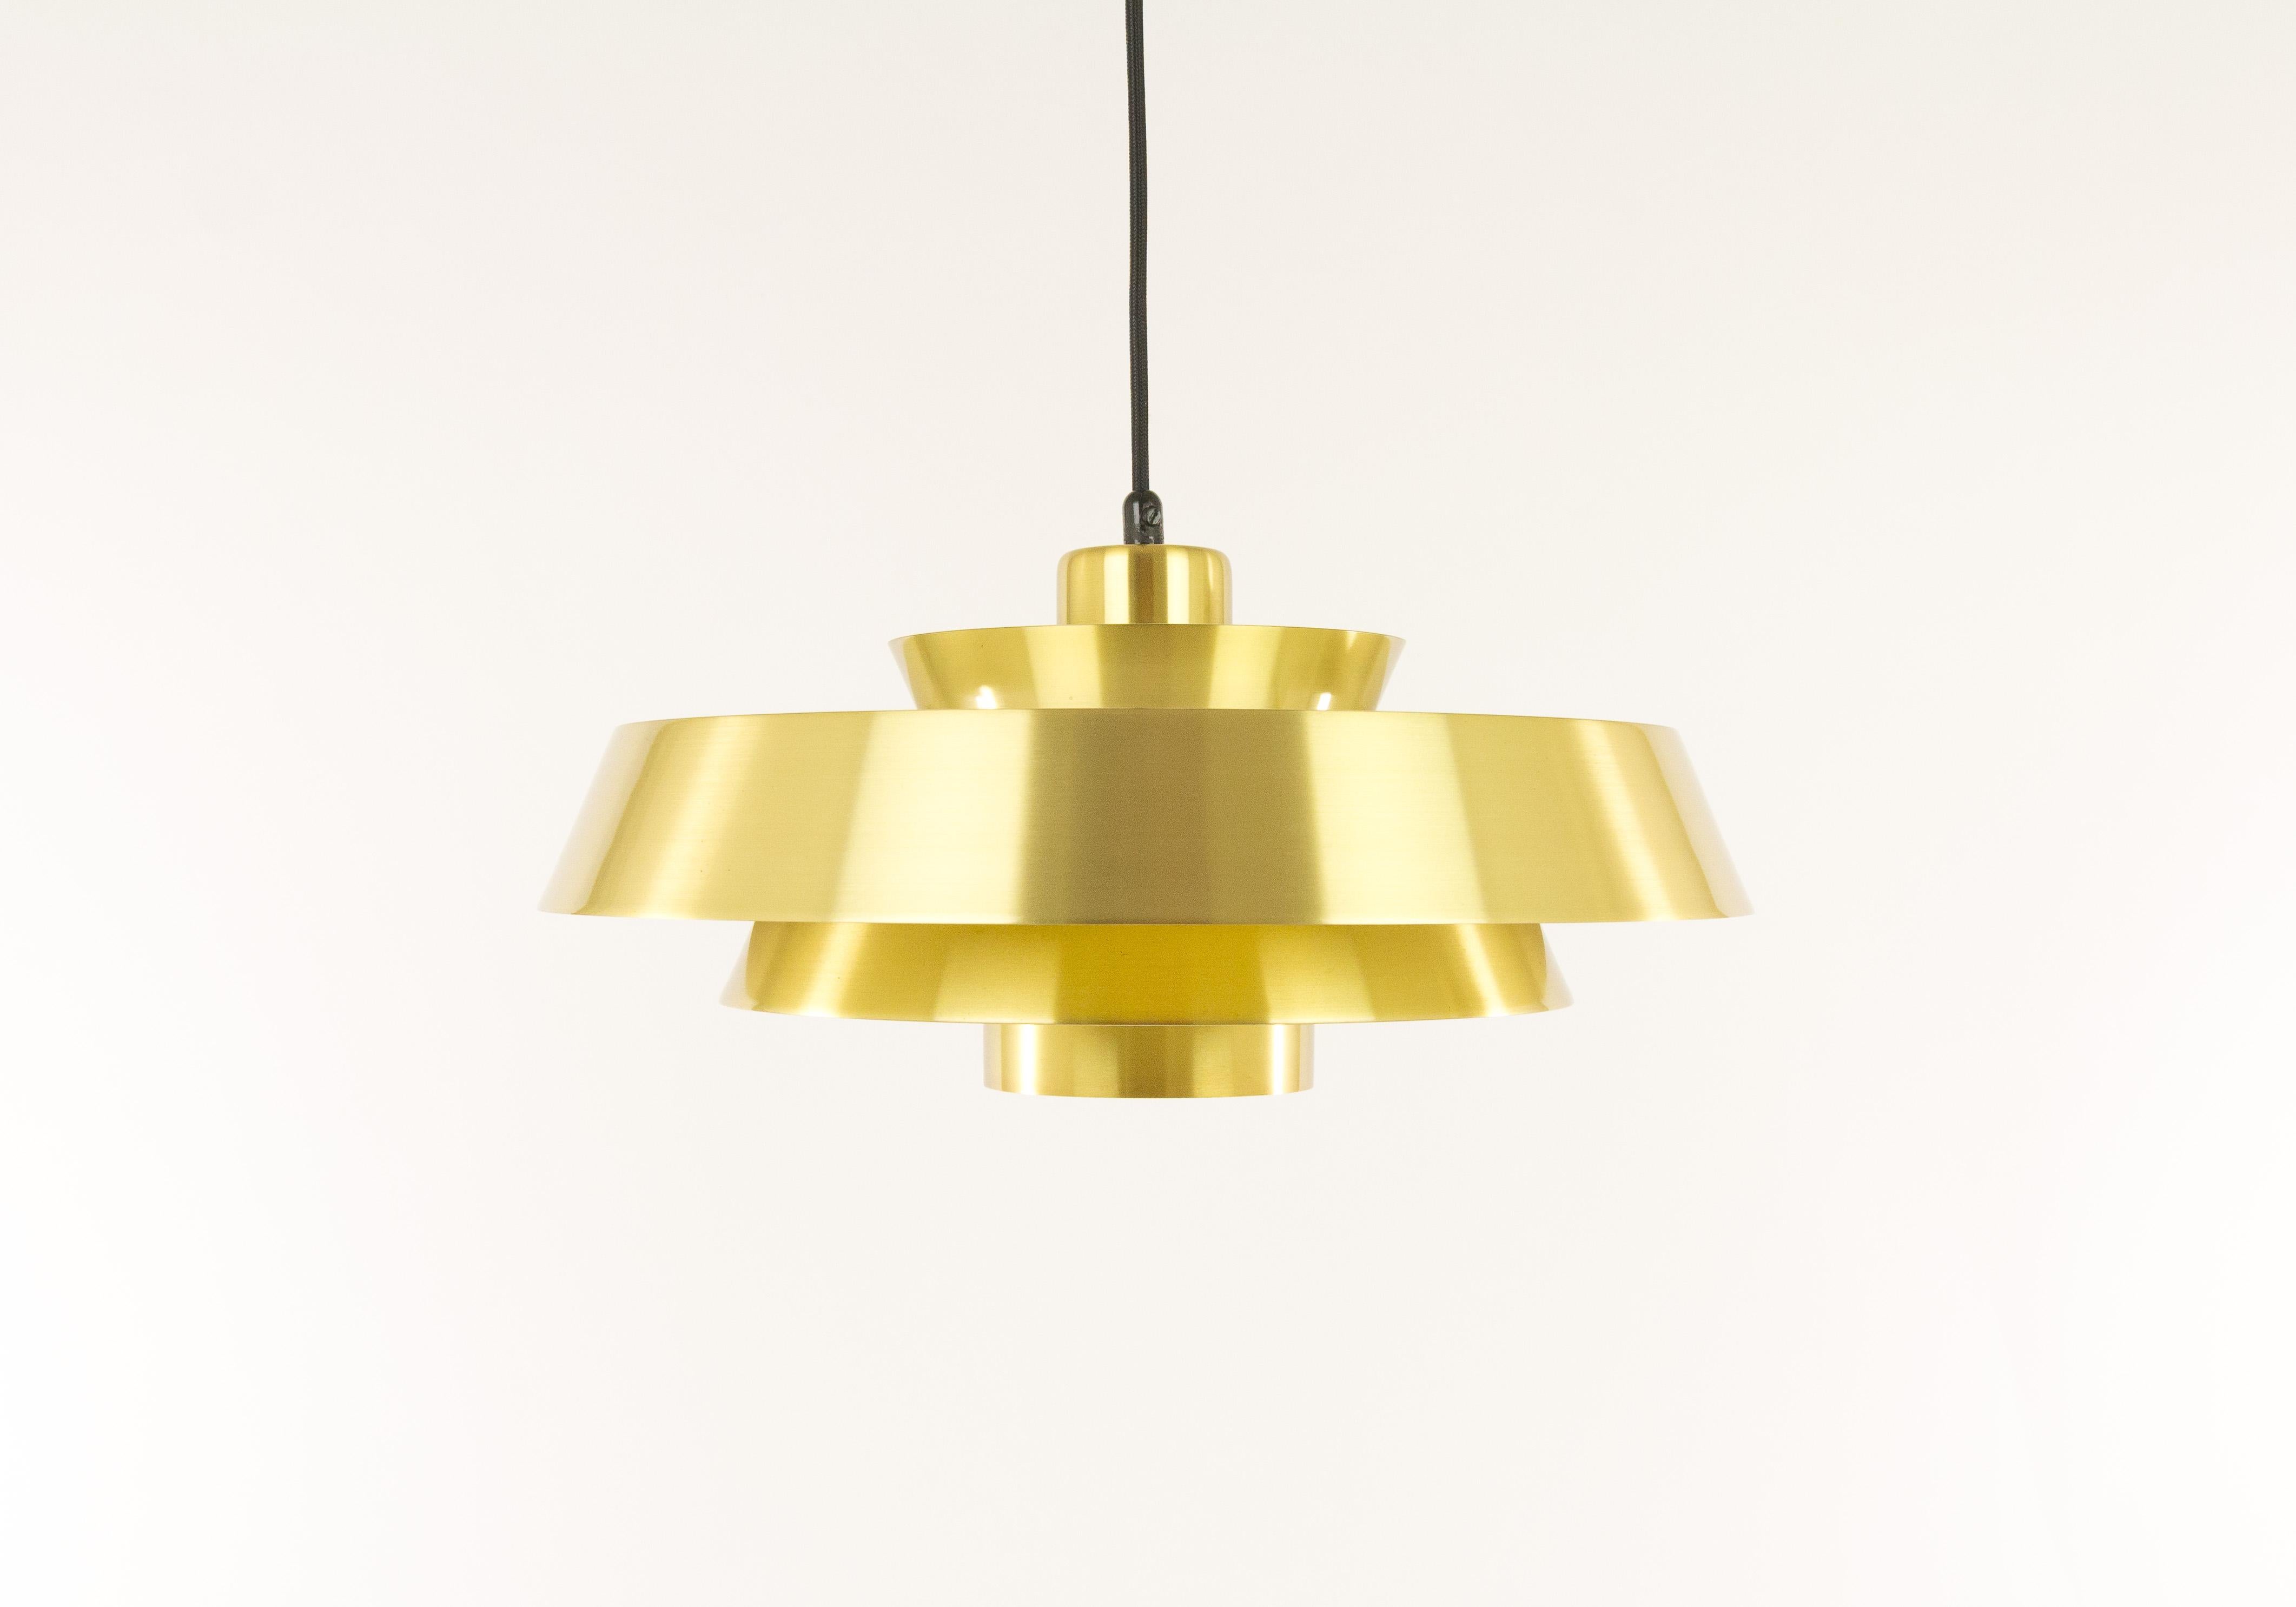 Pendant, model Nova, designed in the 1960s by Jo Hammerborg, main designer of Danish lighting manufacturer Fog & Mørup in the 1960s and 1970s.

This model was produced in three different metals: copper, brass and aluminium. This is the brass